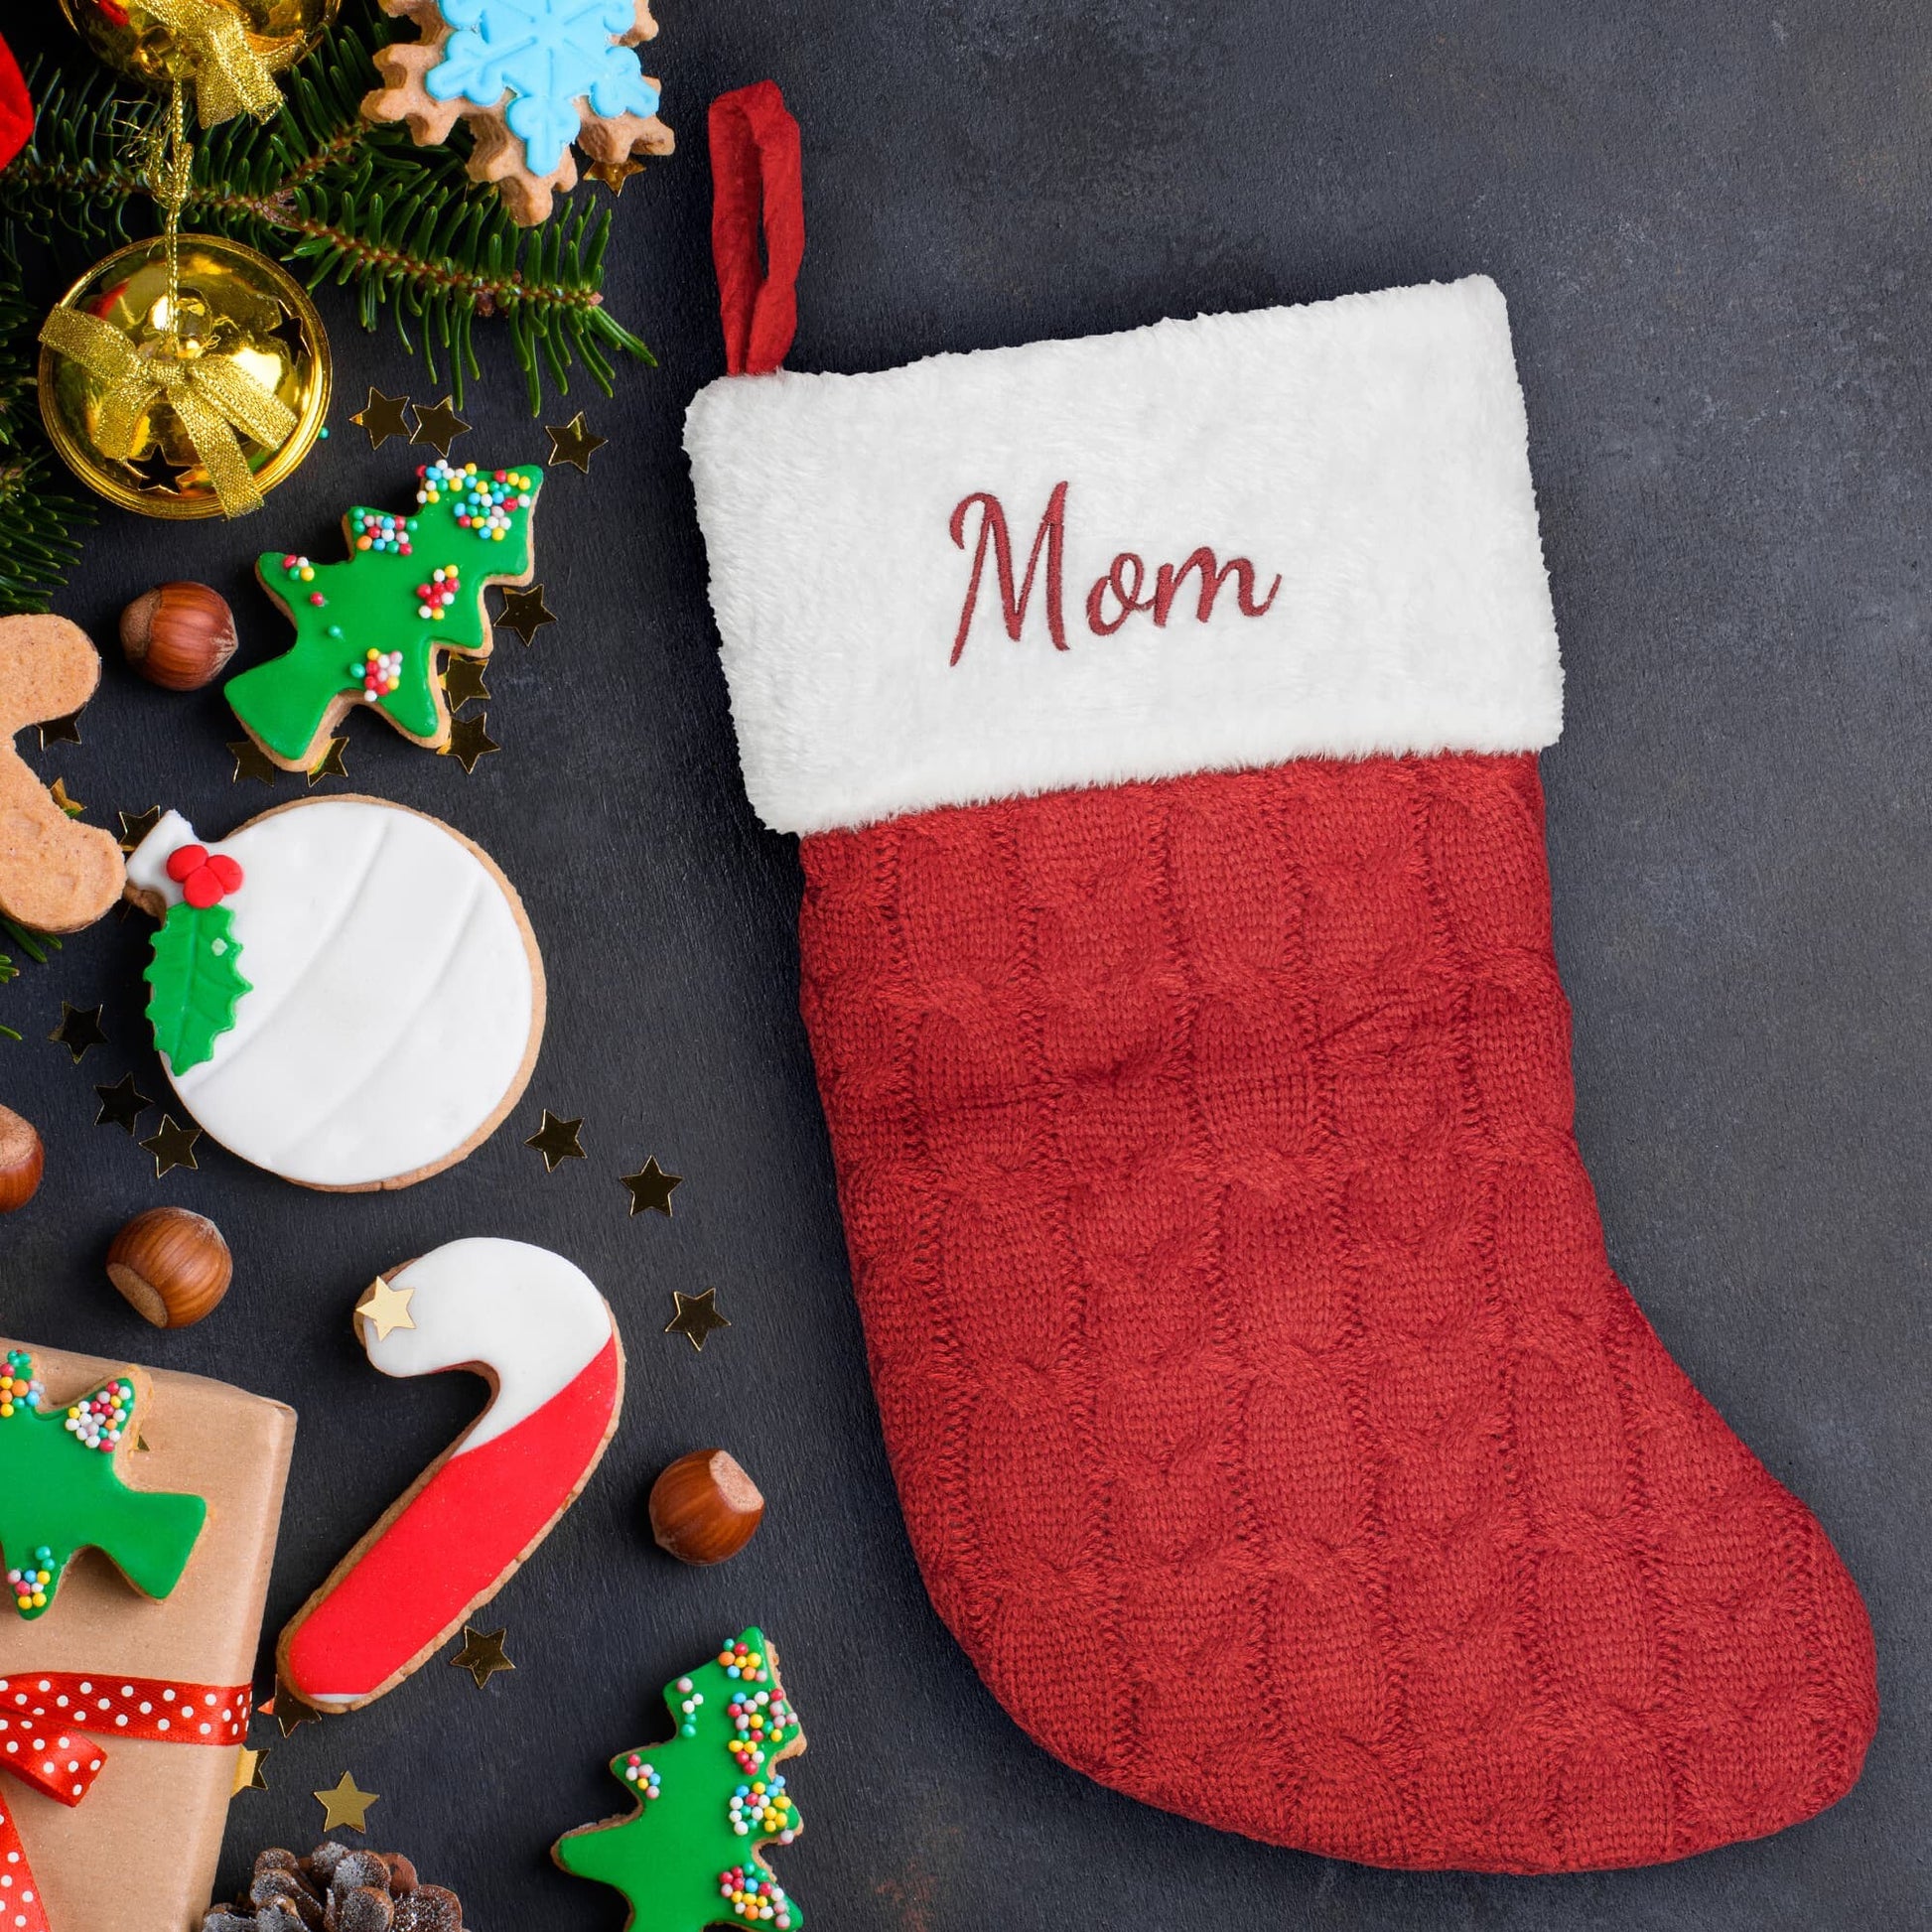 Custom Embroidered Christmas Stocking red with cookies